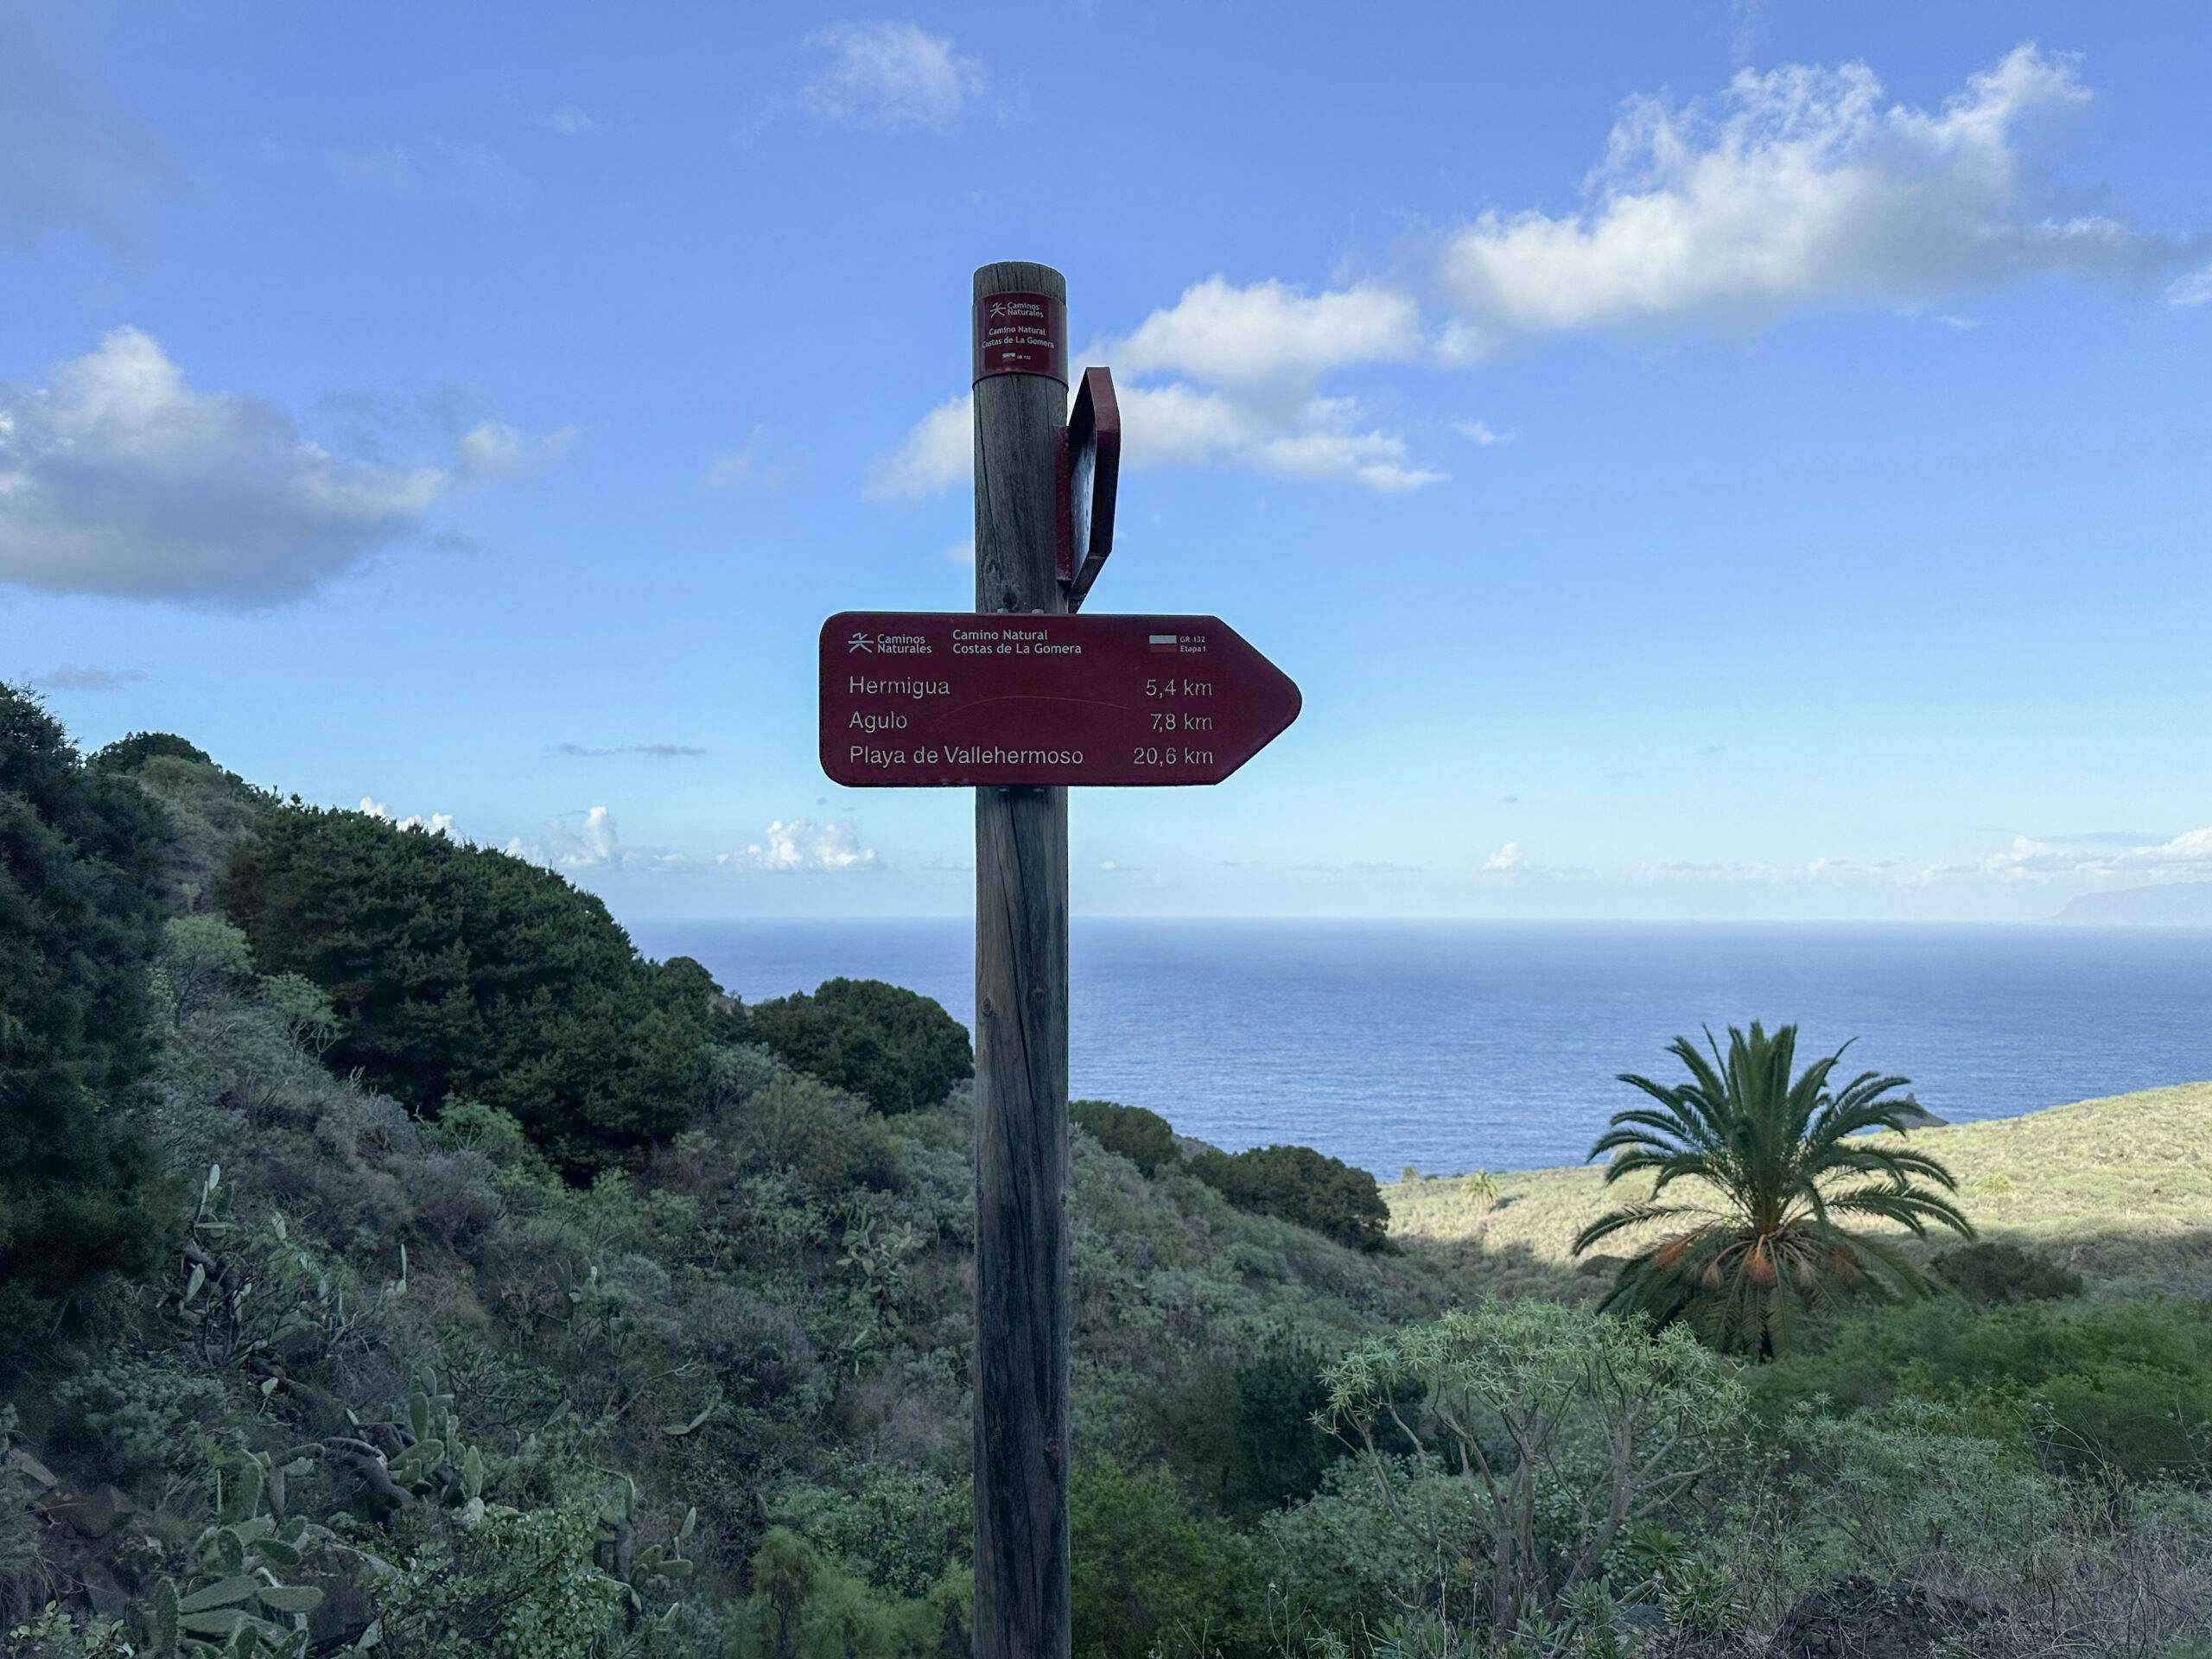 Signposting for the GR-132 long-distance hiking trail